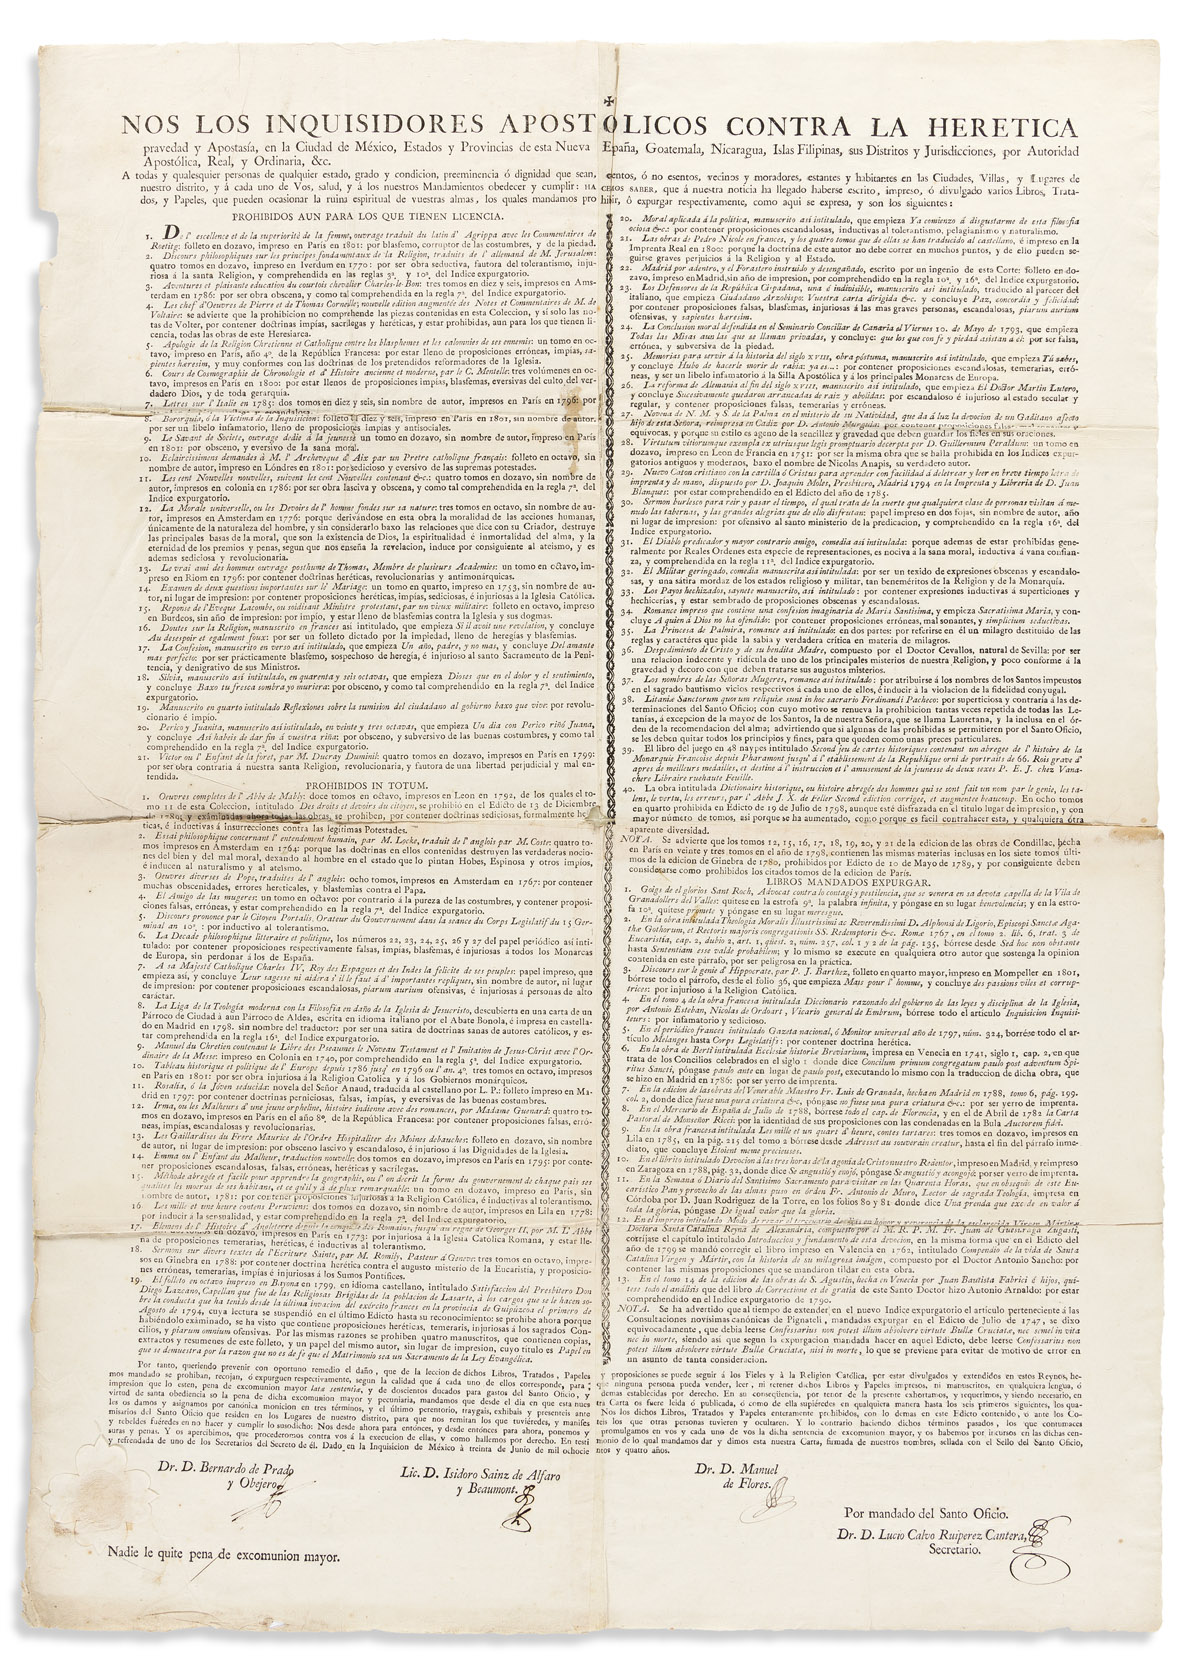 (MEXICAN IMPRINT--1804.) Decree by the Inquisition banning or restricting 74 books.